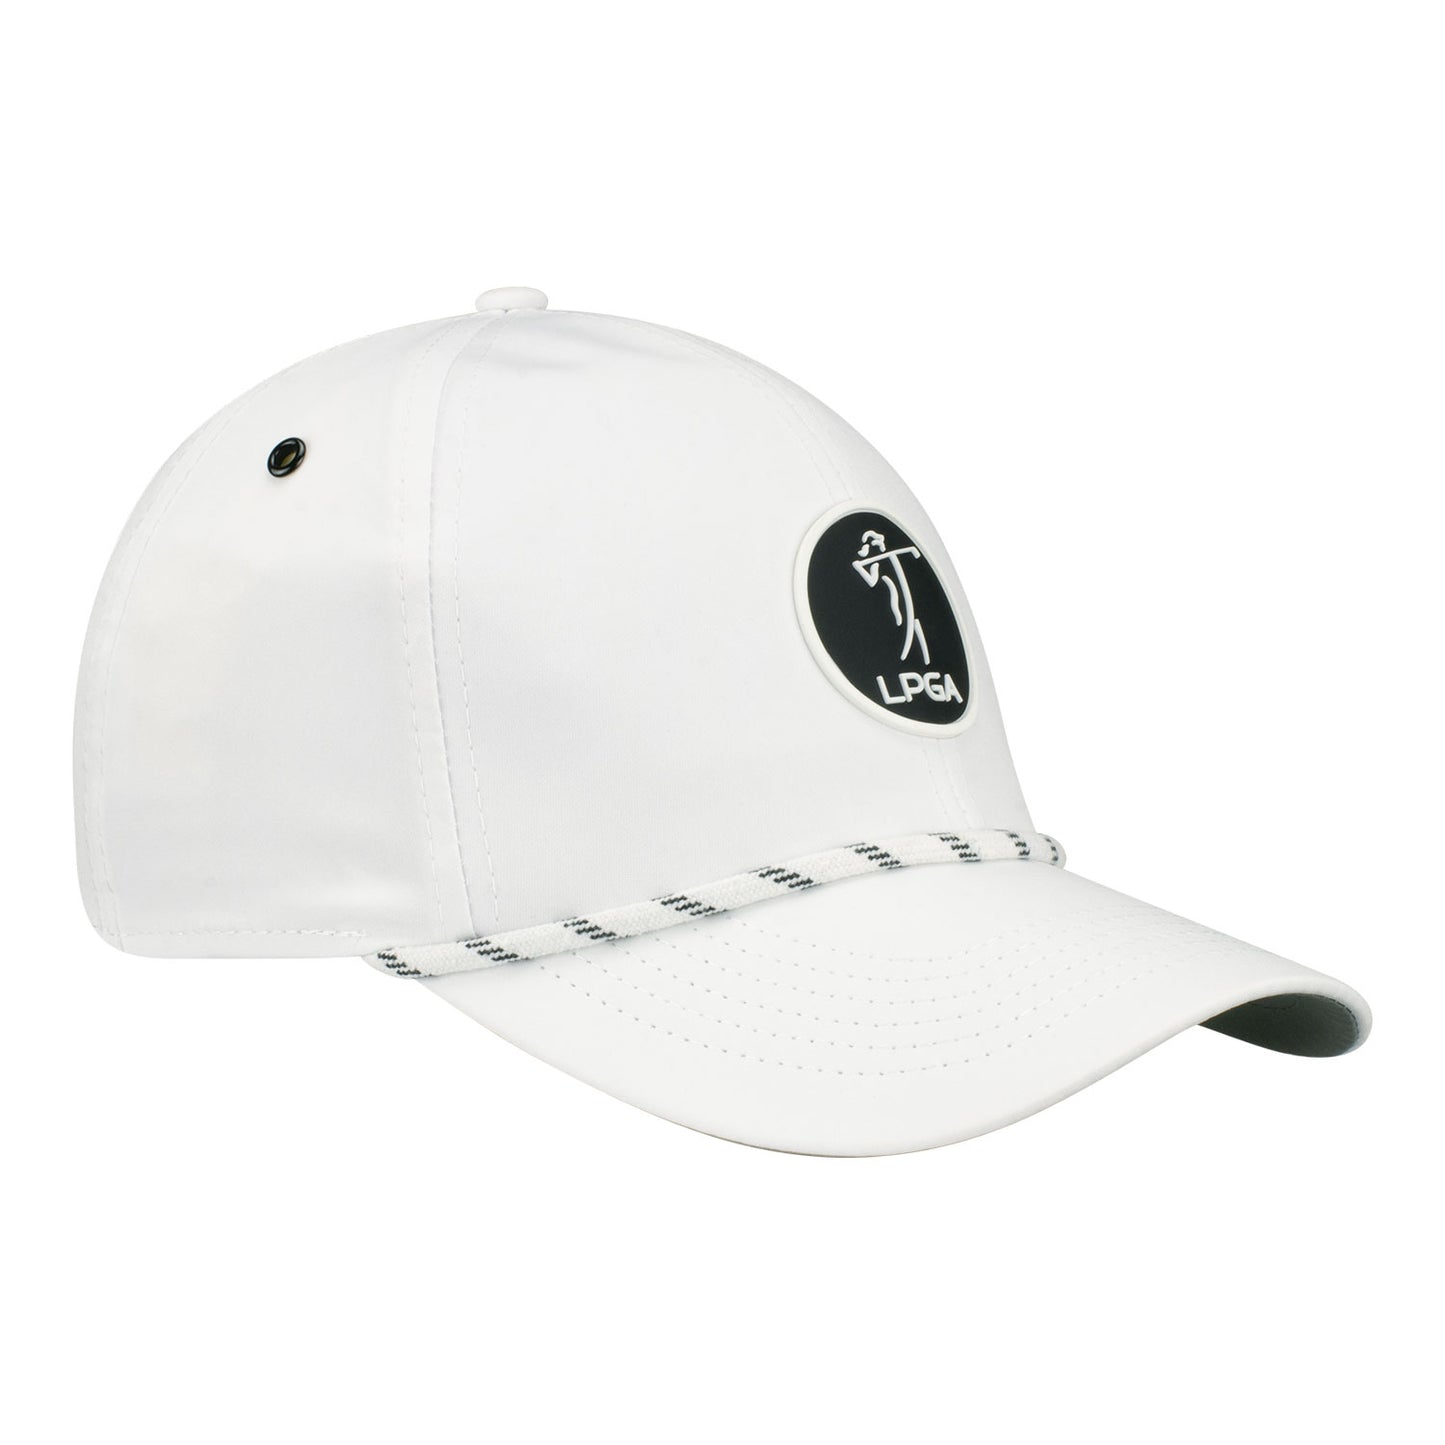 Imperial LPGA Men's Rope Hat with HP+ Patch in White - Angled Right Side View